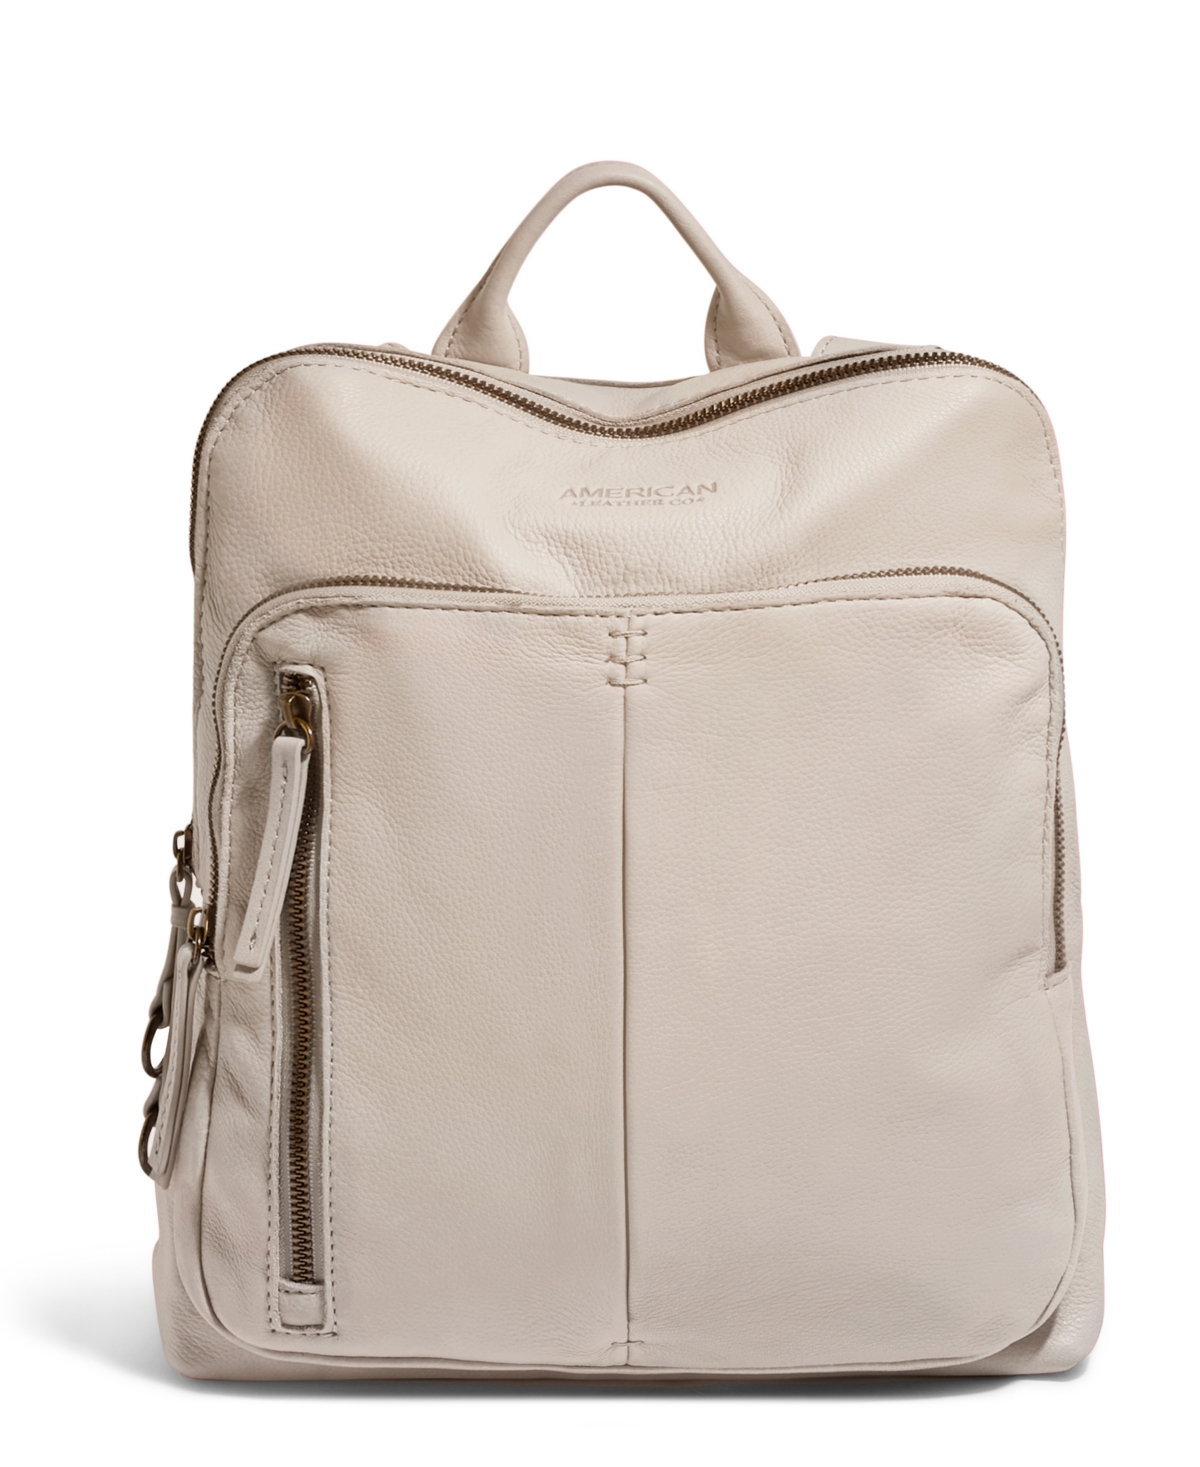 American Leather Co. Cleveland Backpack In Stone Smooth